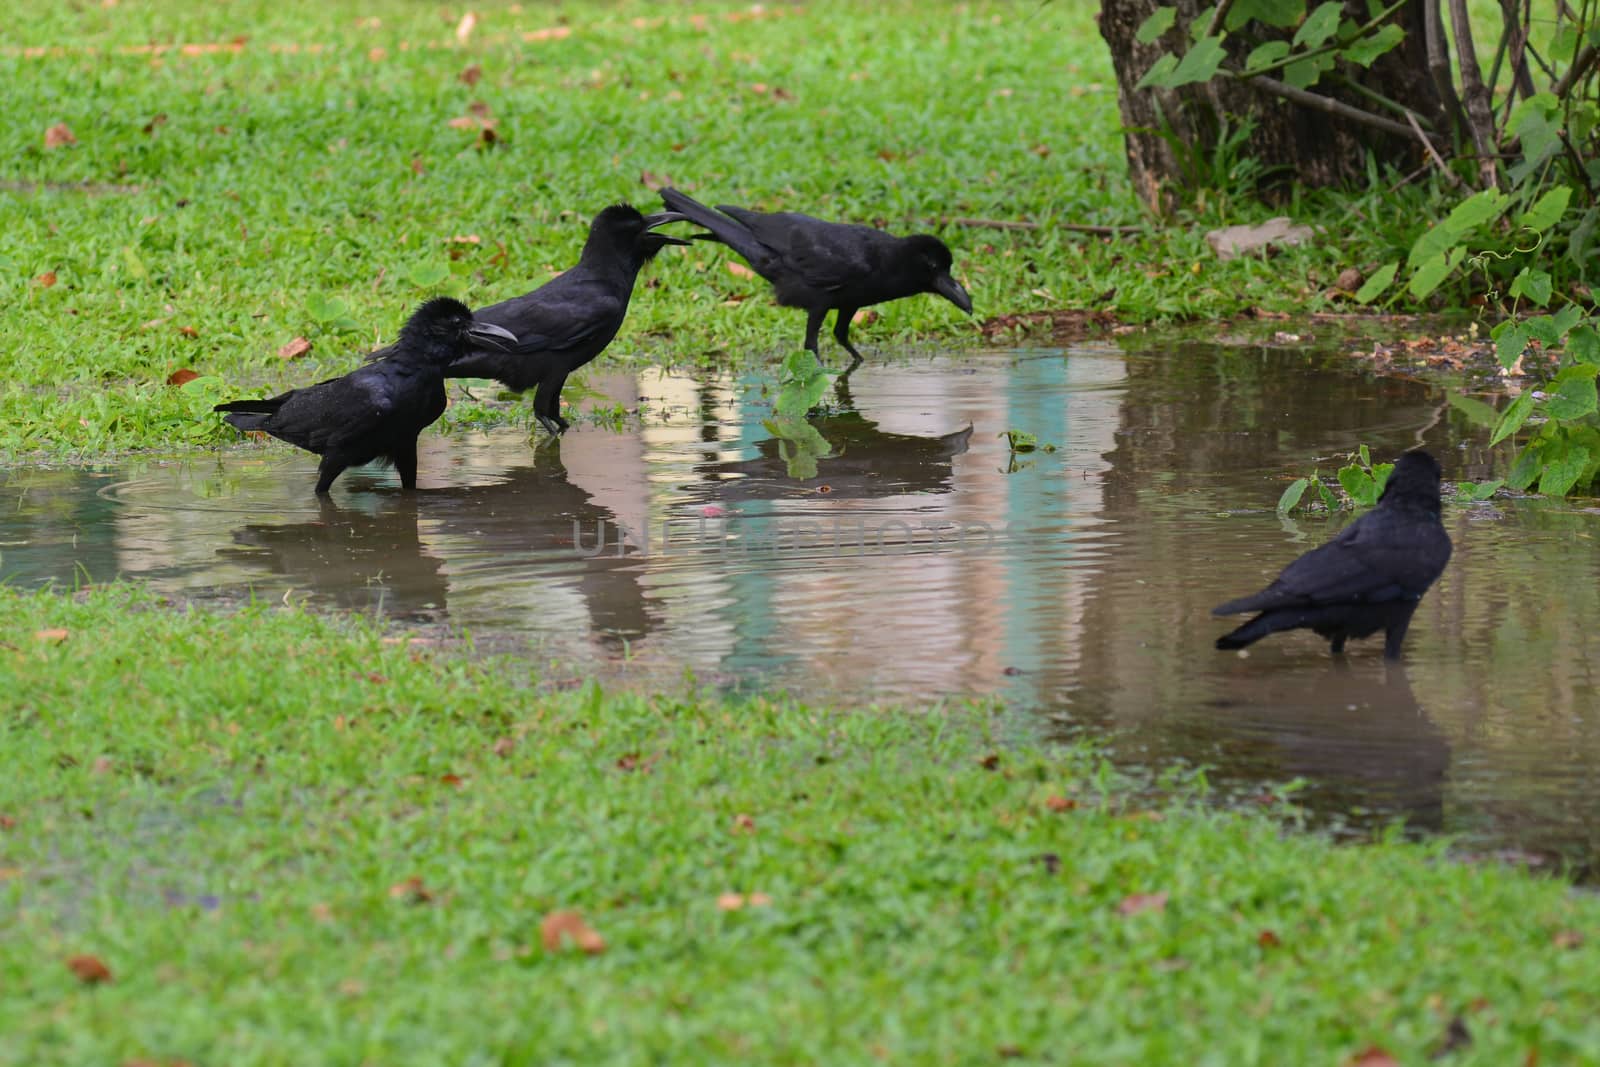 jungle crow  standing on the water in nature, note select focus leftmost